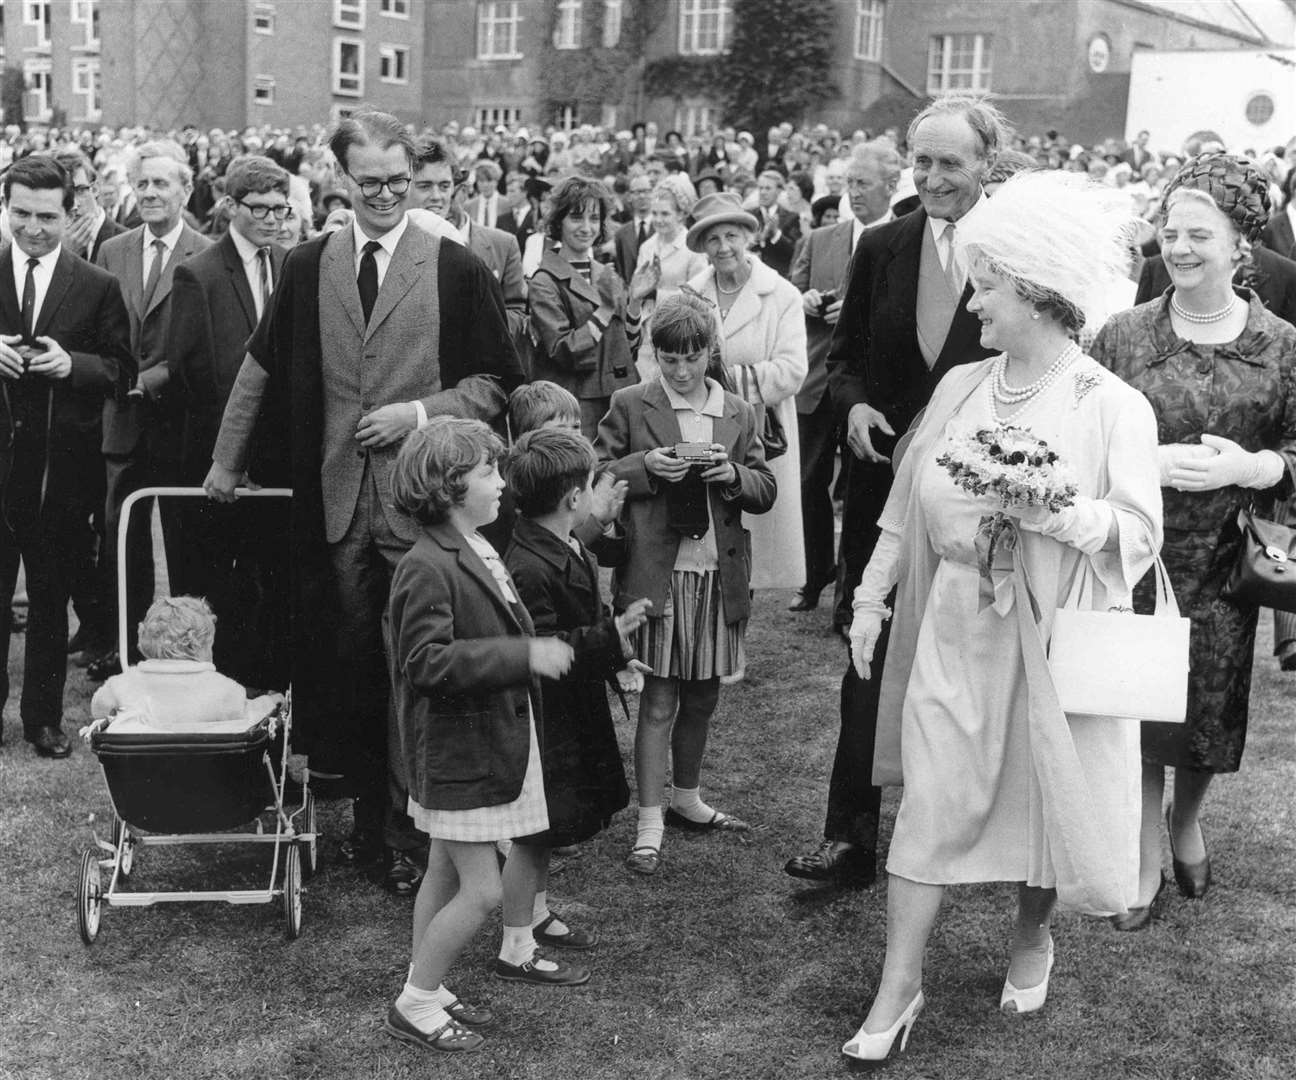 The Queen Mother was guest of honour at a garden party at Withersdane Hall, Wye College, in July 1965 after the formalities of the commemoration ceremonies were out of the way. She mingled with the 1,000 guests and delighted many of them by stopping for a chat